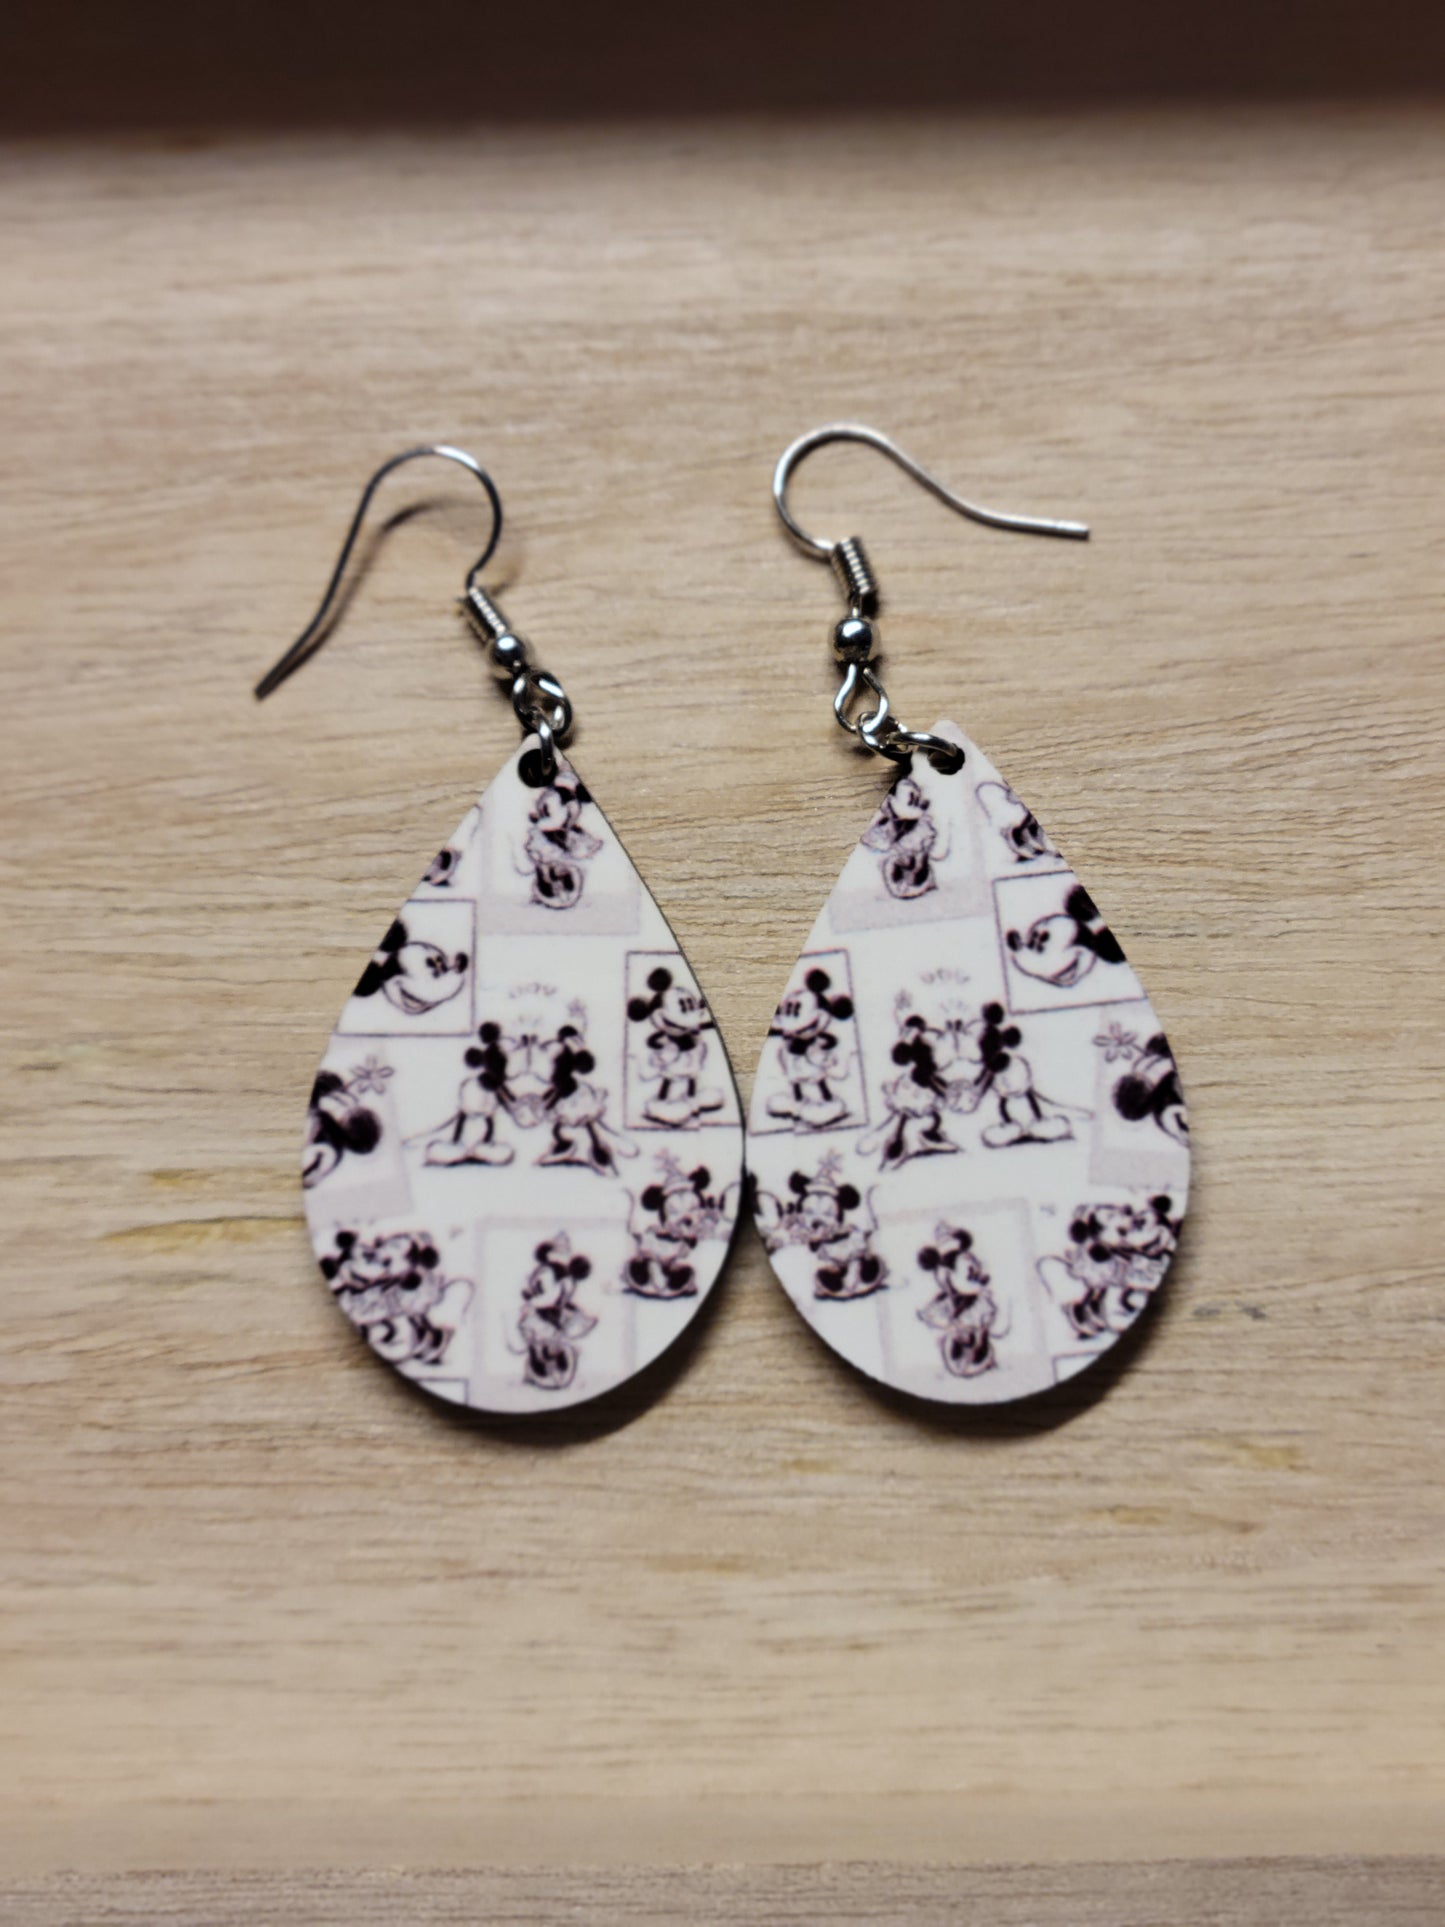 Mickey and Minnie kissing, Valentine Earrings